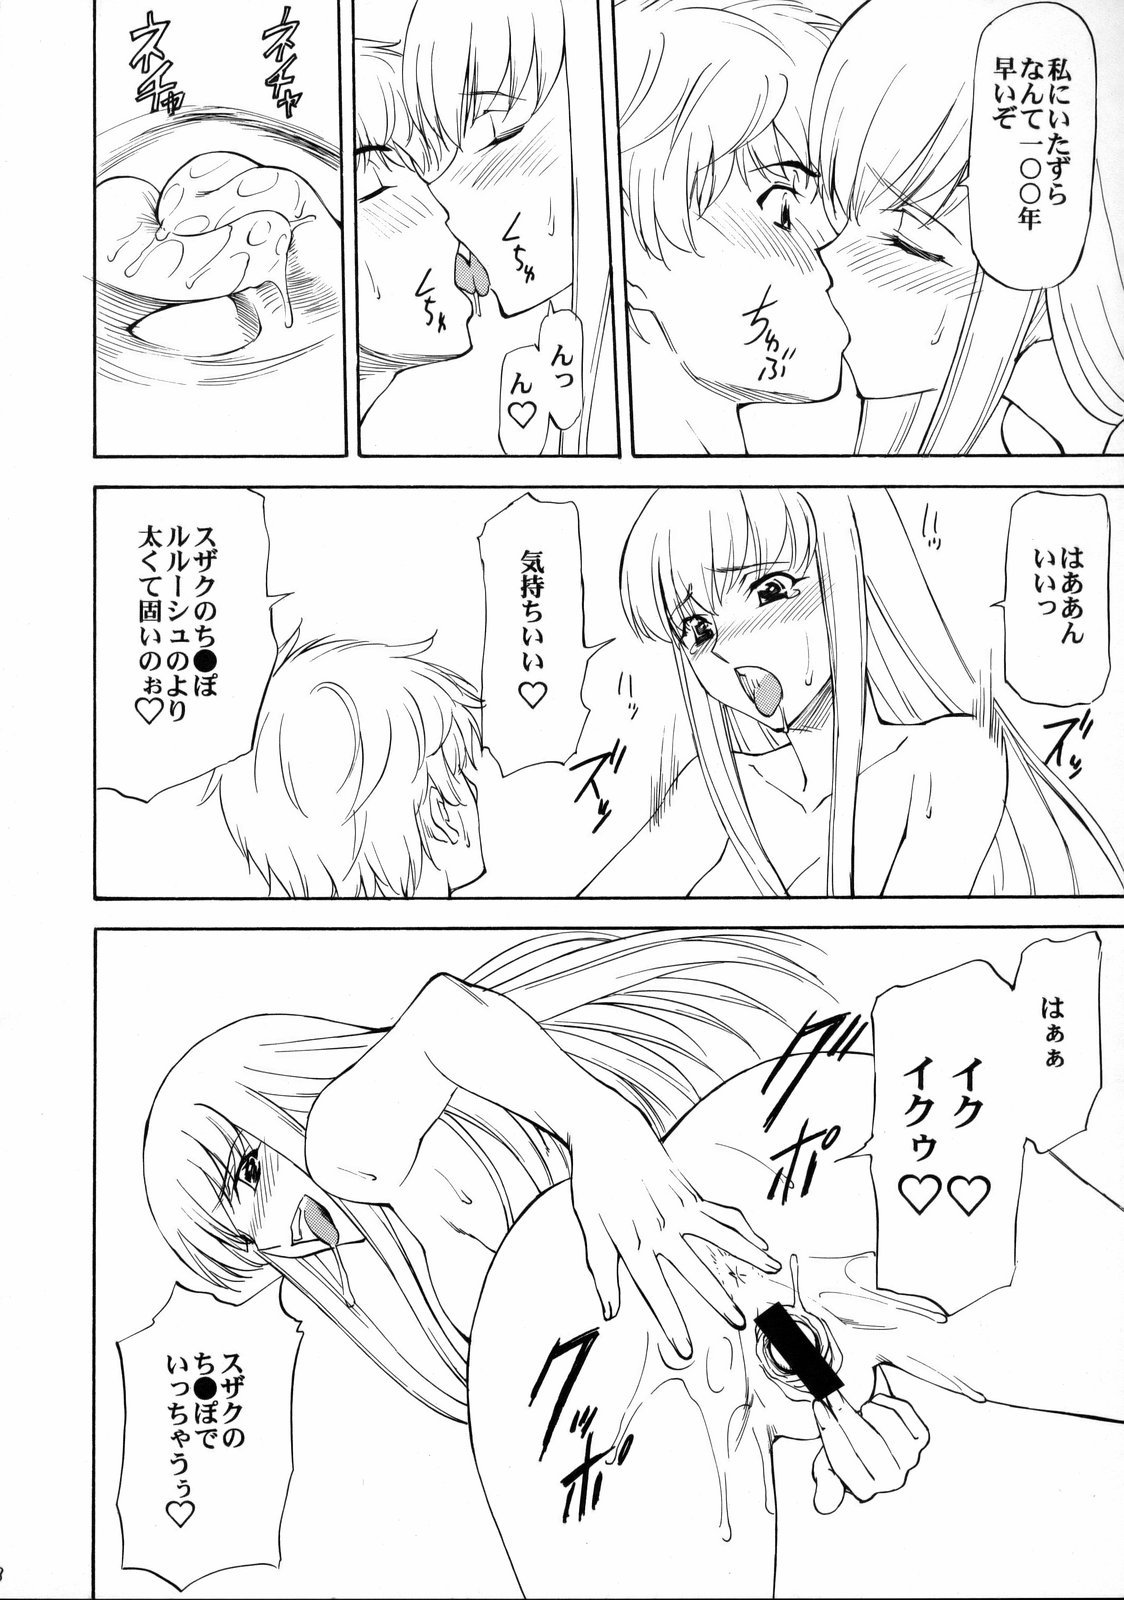 (C75) [Leaf Party (Nagare Ippon)] LeLe Pappa Vol. 14 Megumiruku (CODE GEASS: Lelouch of the Rebellion) page 9 full